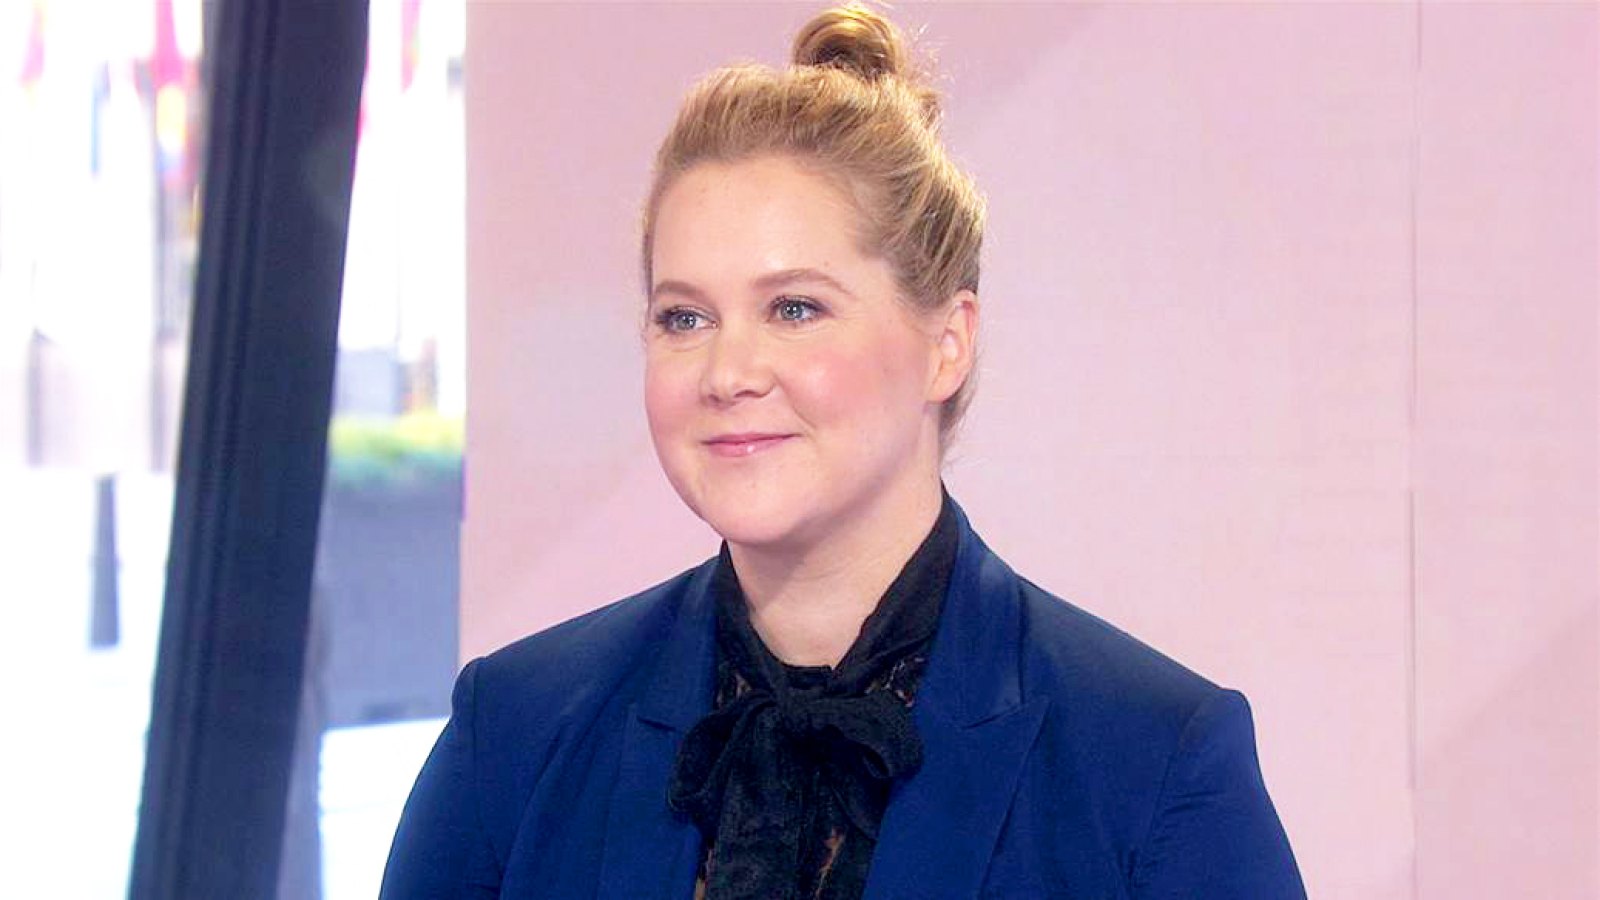 Amy Schumer on ‘Today Show‘